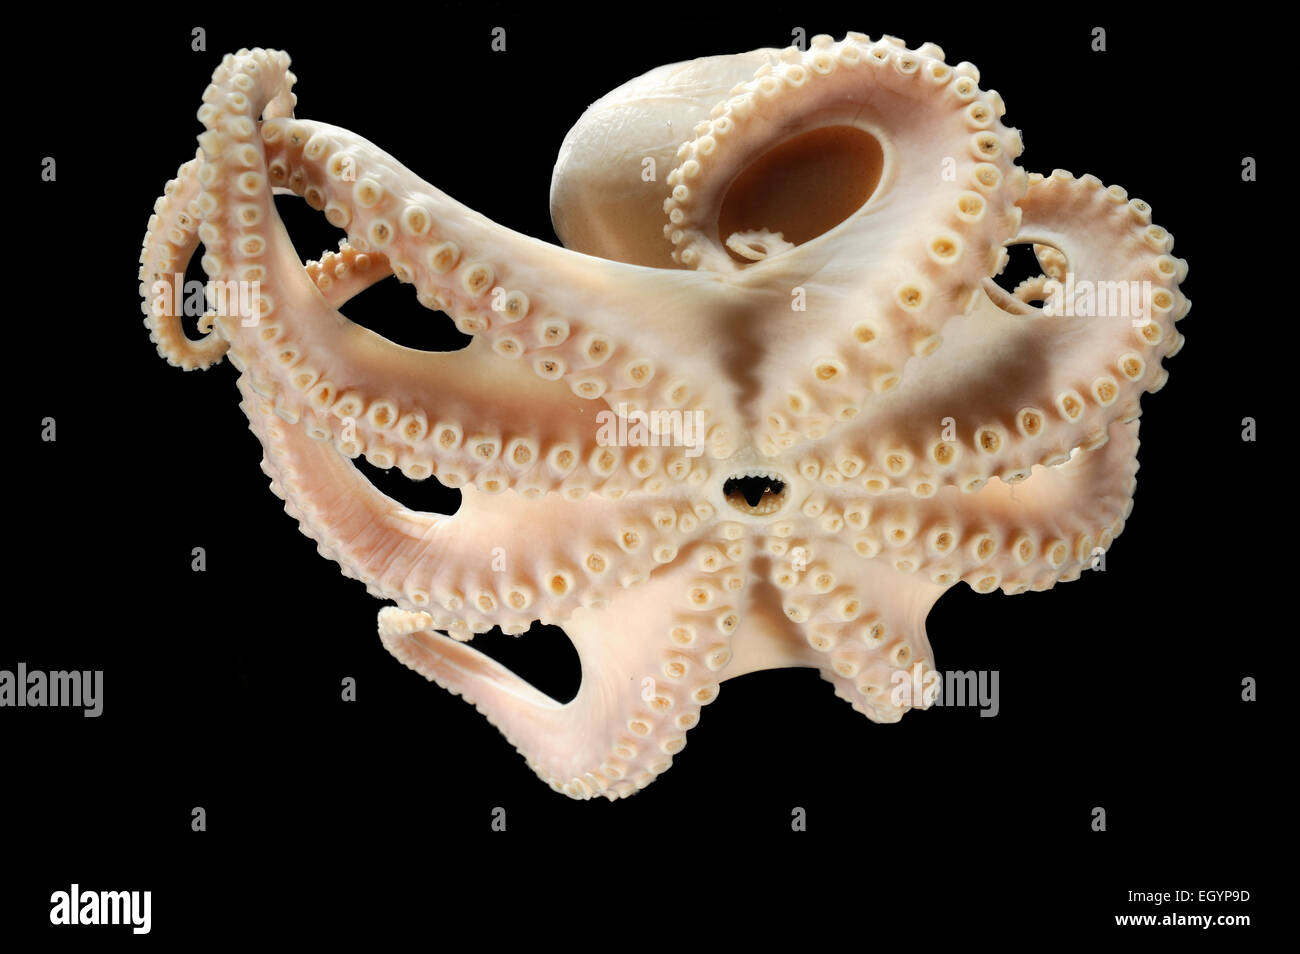 (Benthoctopus piscatorum) Picture was taken in cooperation with the Zoological Museum University of Hamburg | Krake (Benthoctopu Stock Photo